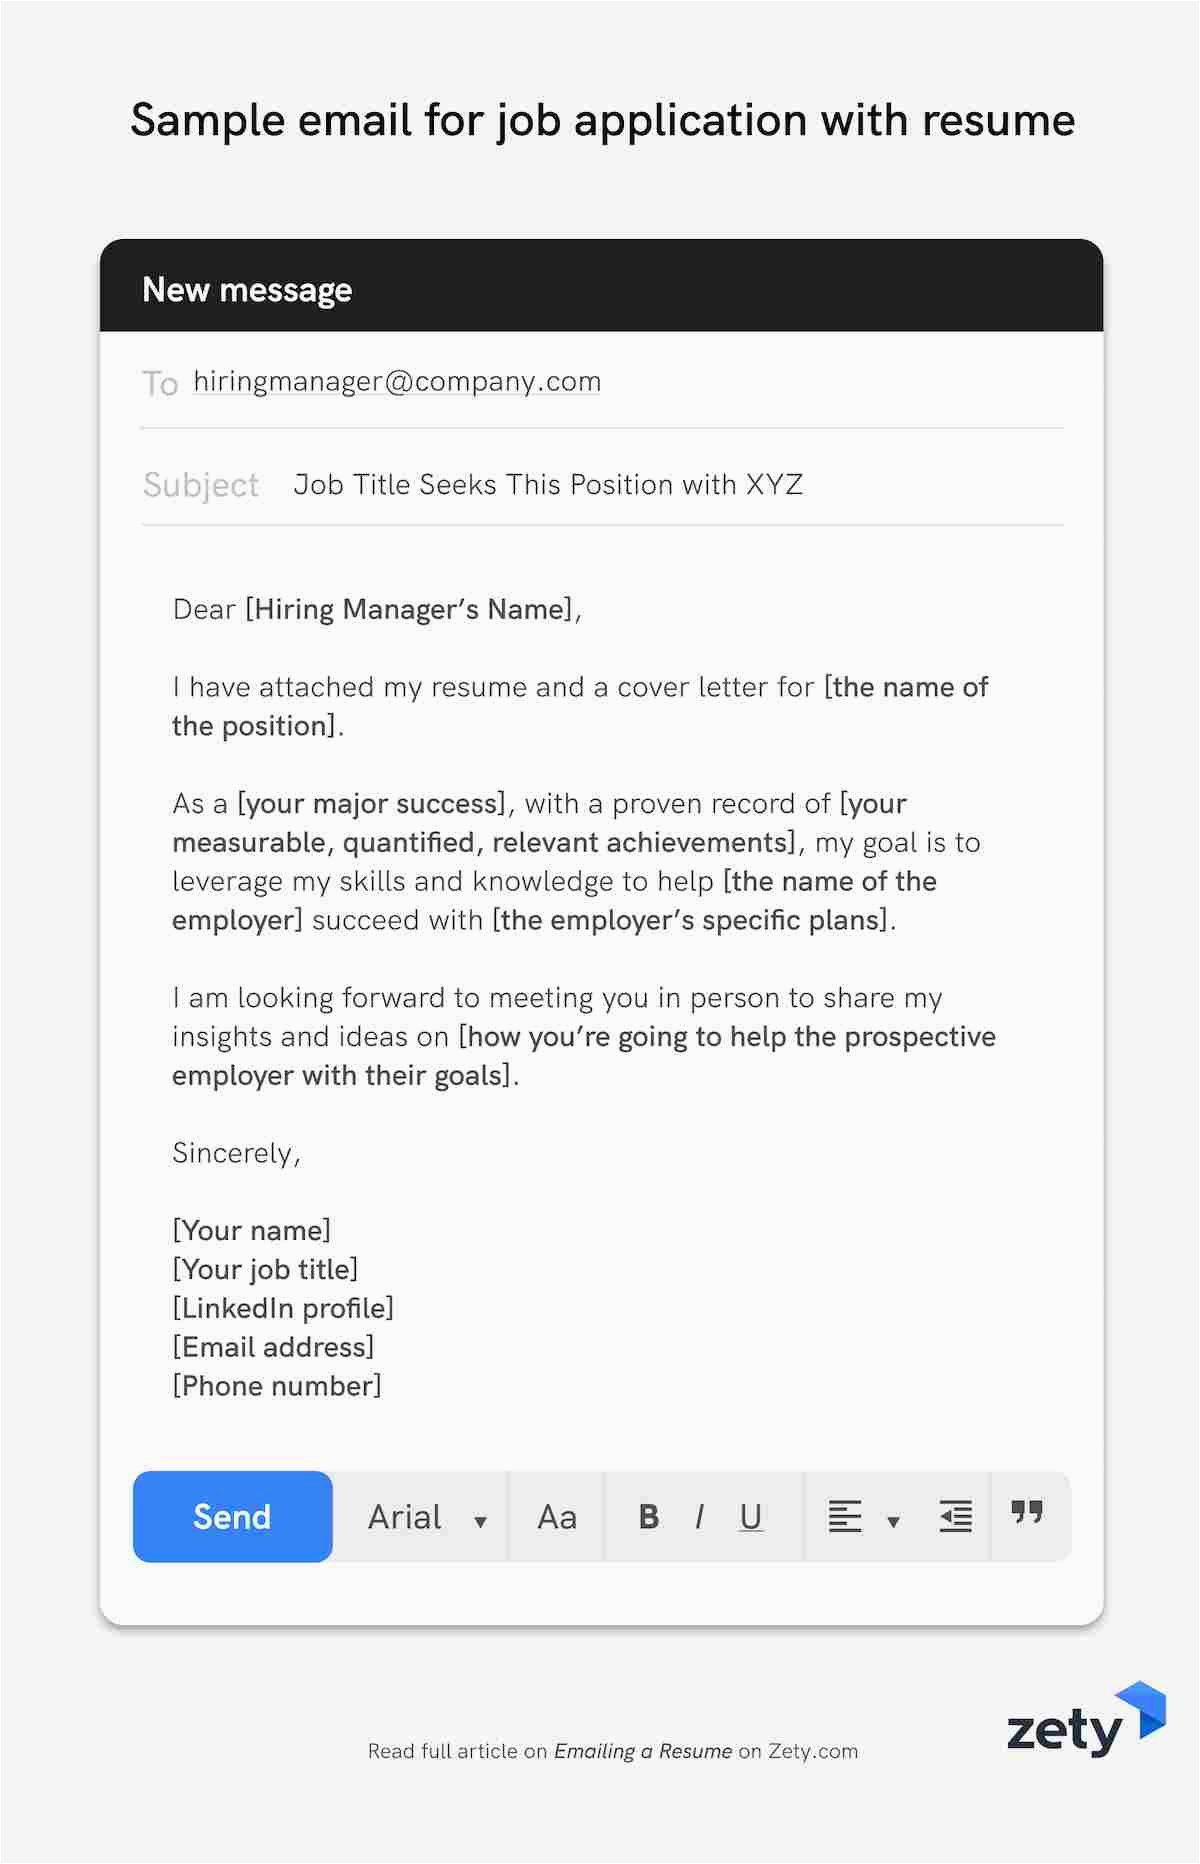 Sample Of Sending Resume by Email Emailing A Resume 12 Job Application Email Samples